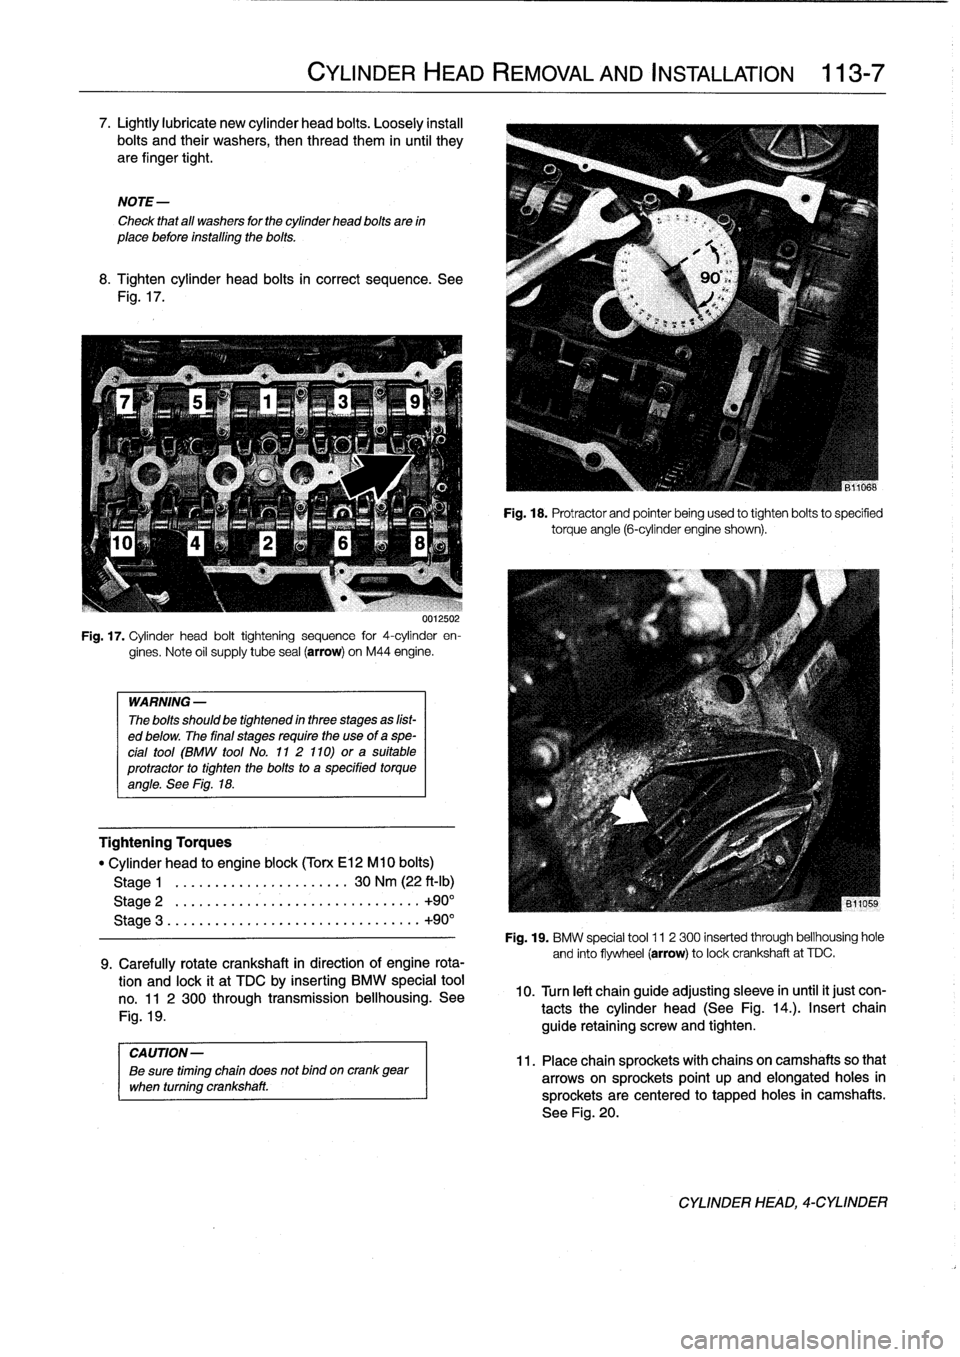 BMW 328i 1998 E36 Workshop Manual 
7
.
Lightly
lubricate
new
cylinder
head
bolts
.
Loosely
instan
bolts
and
their
washers,
then
thread
them
in
until
they
are
finger
tight
.

NOTE-

Check
that
all
washers
for
the
cylinder
head
bolts
ar